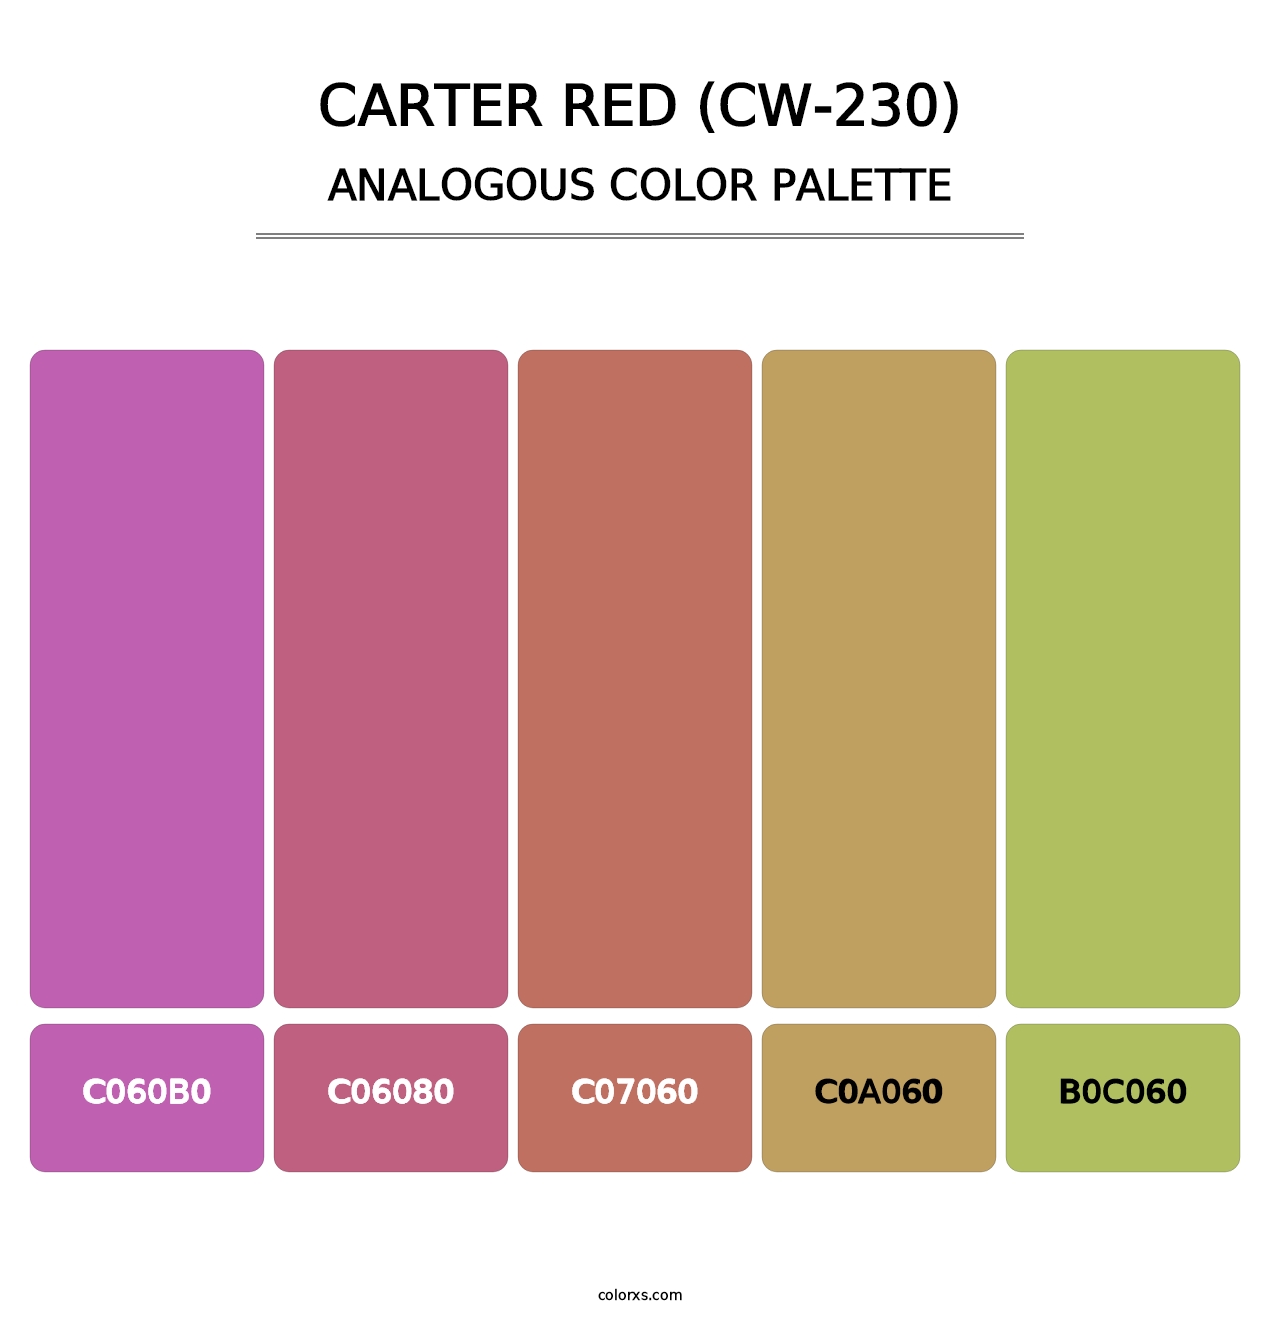 Carter Red (CW-230) - Analogous Color Palette